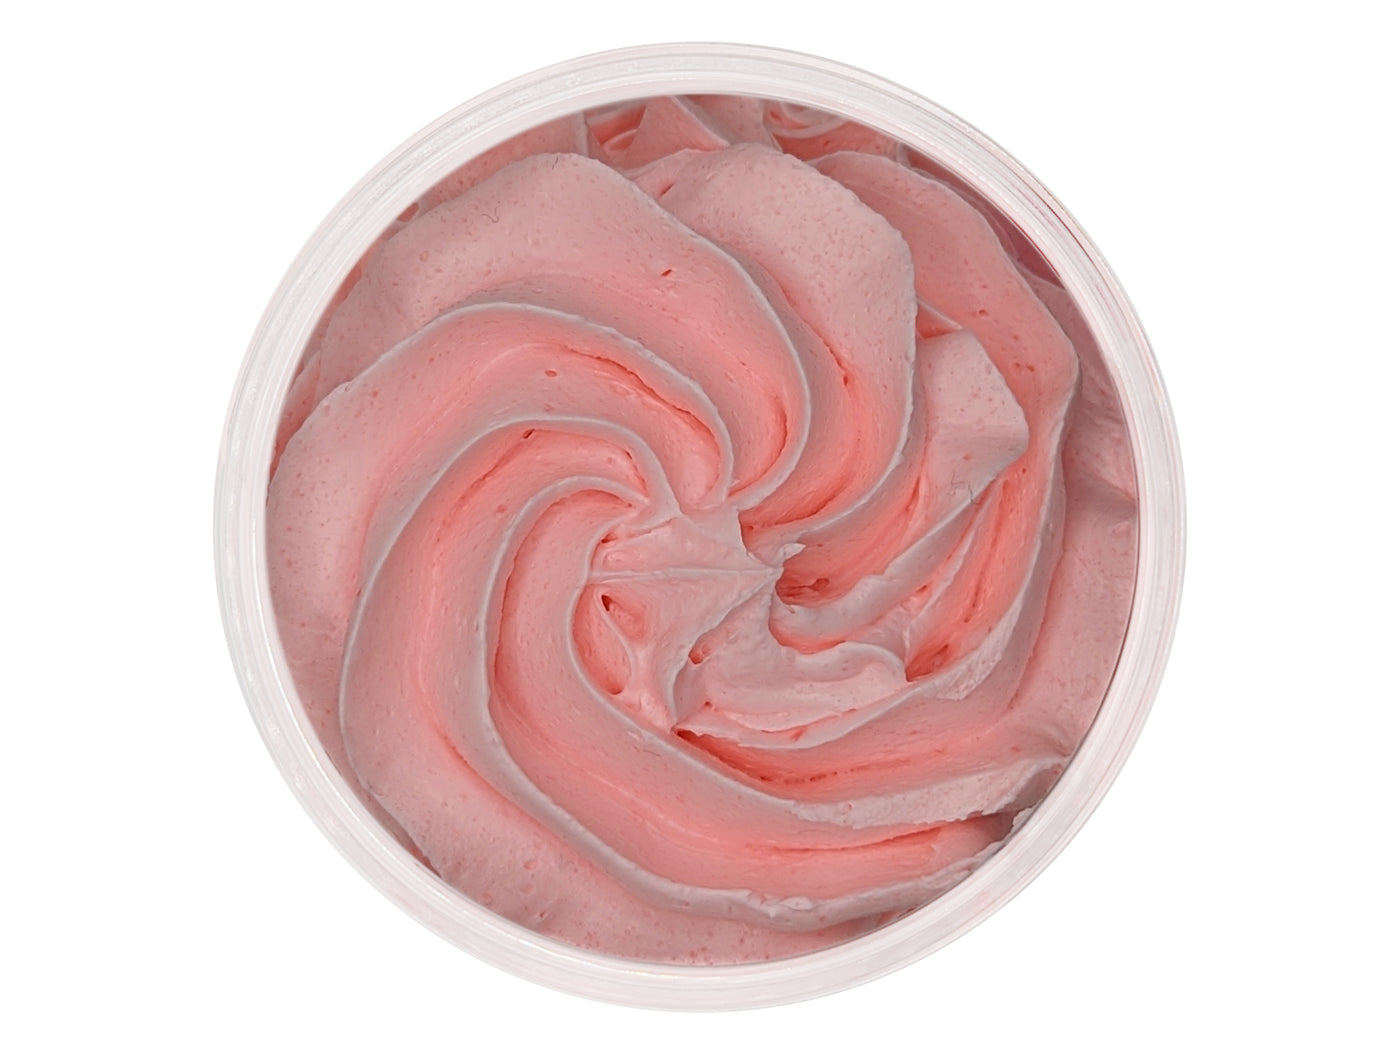 Cherrylicious Whipped Soap